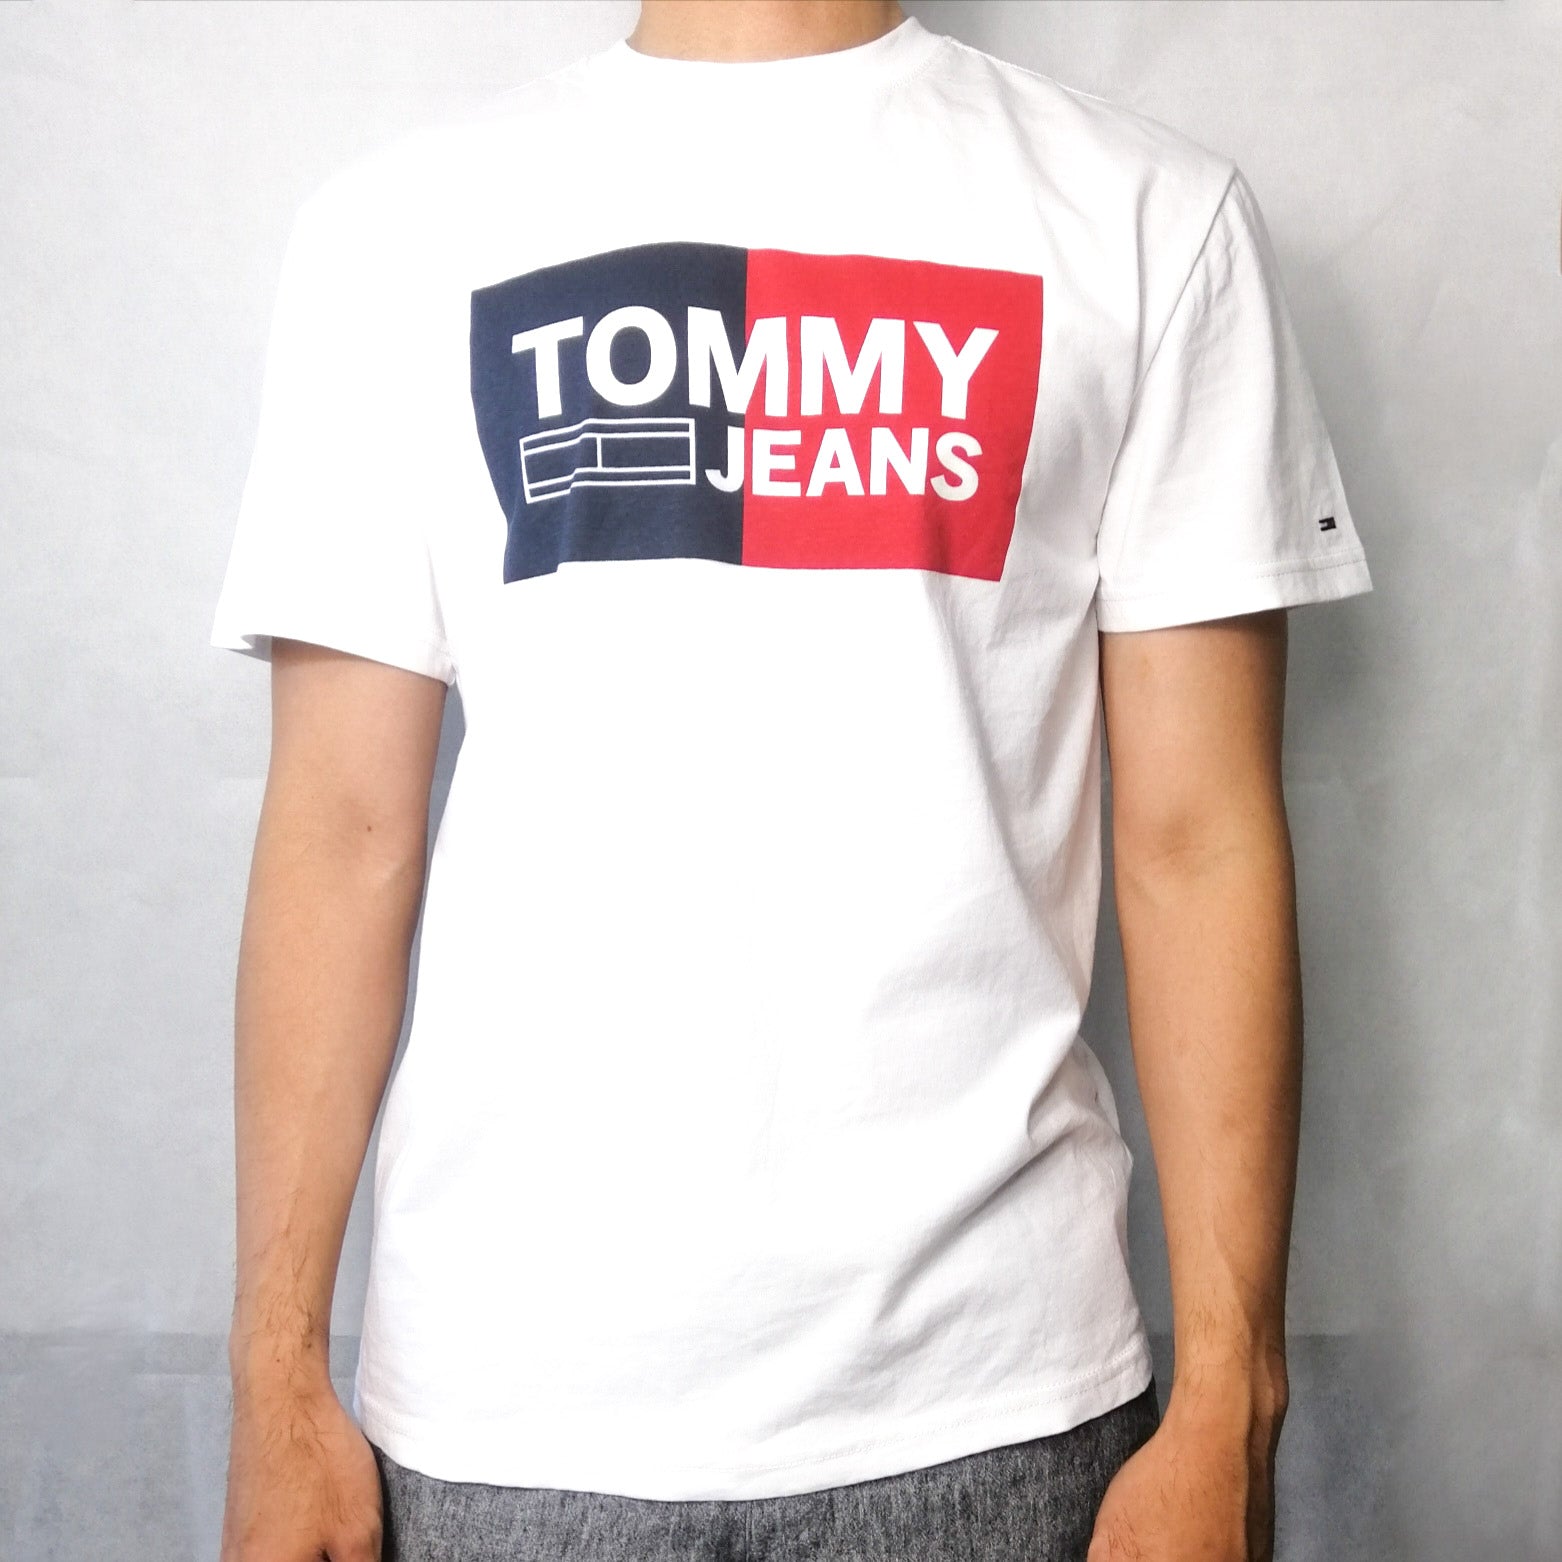 tommy hilfiger t shirt tommy jeans